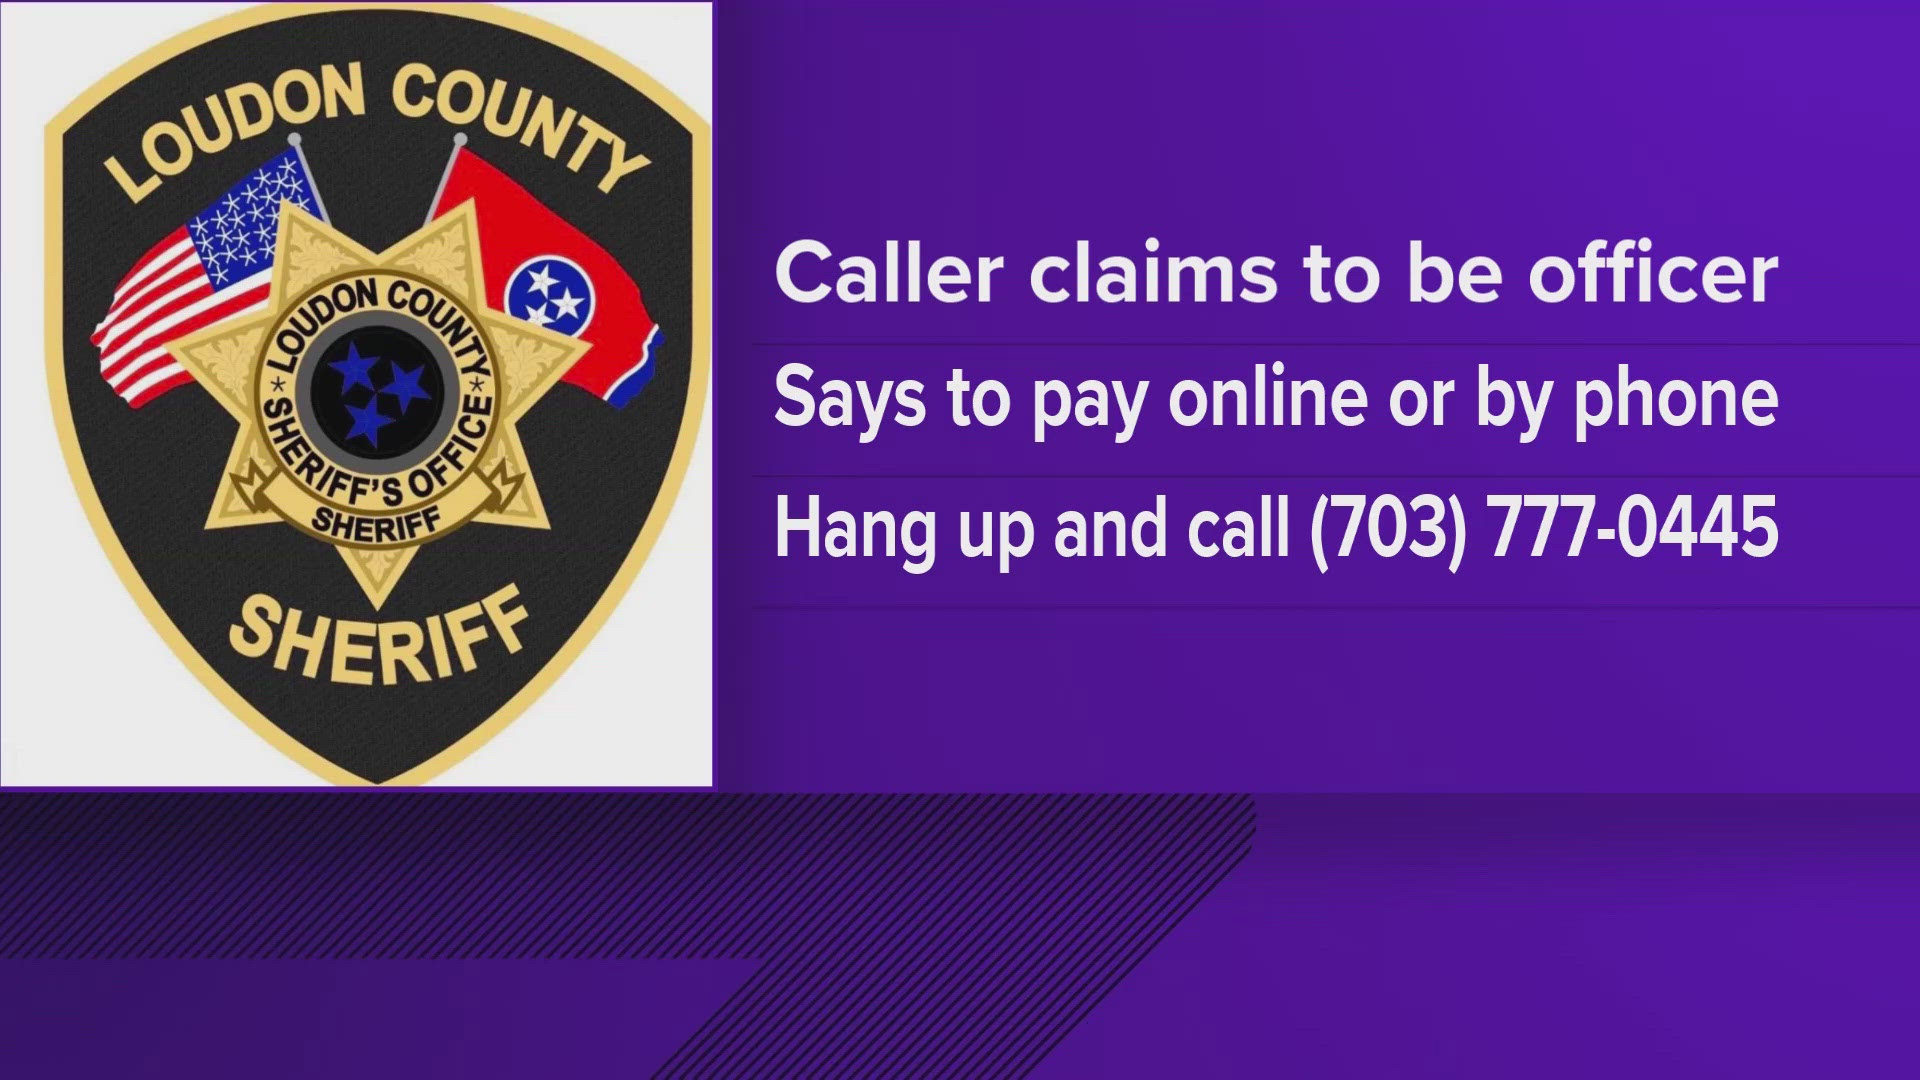 The sheriff's office said the scam involves a person claiming to be an officer and telling people they are in legal trouble, encouraging them to make a payment.